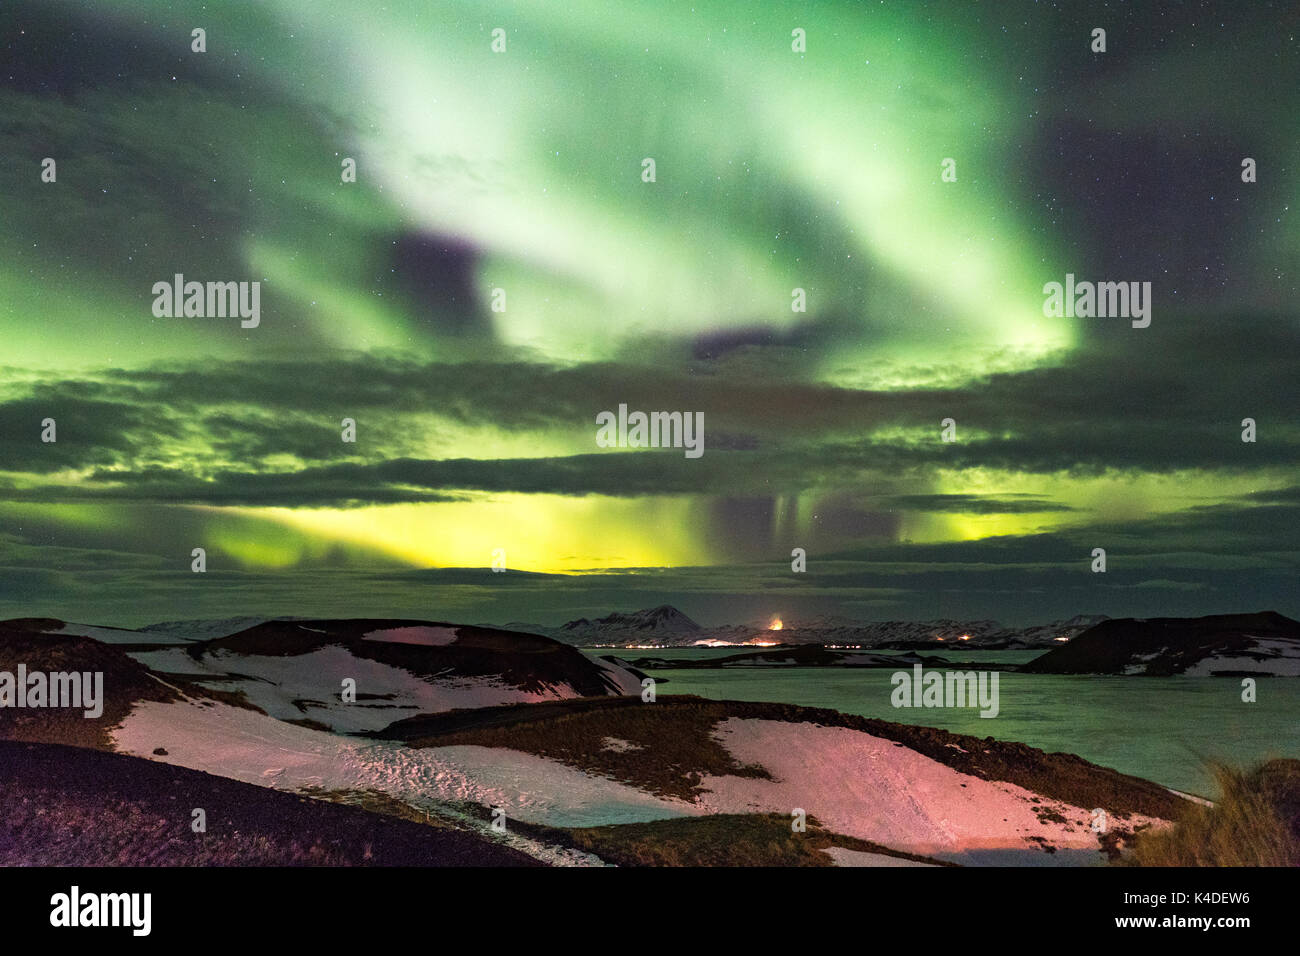 Northern Lights Dancing In The Skies Over Myvatn, Iceland Stock Photo